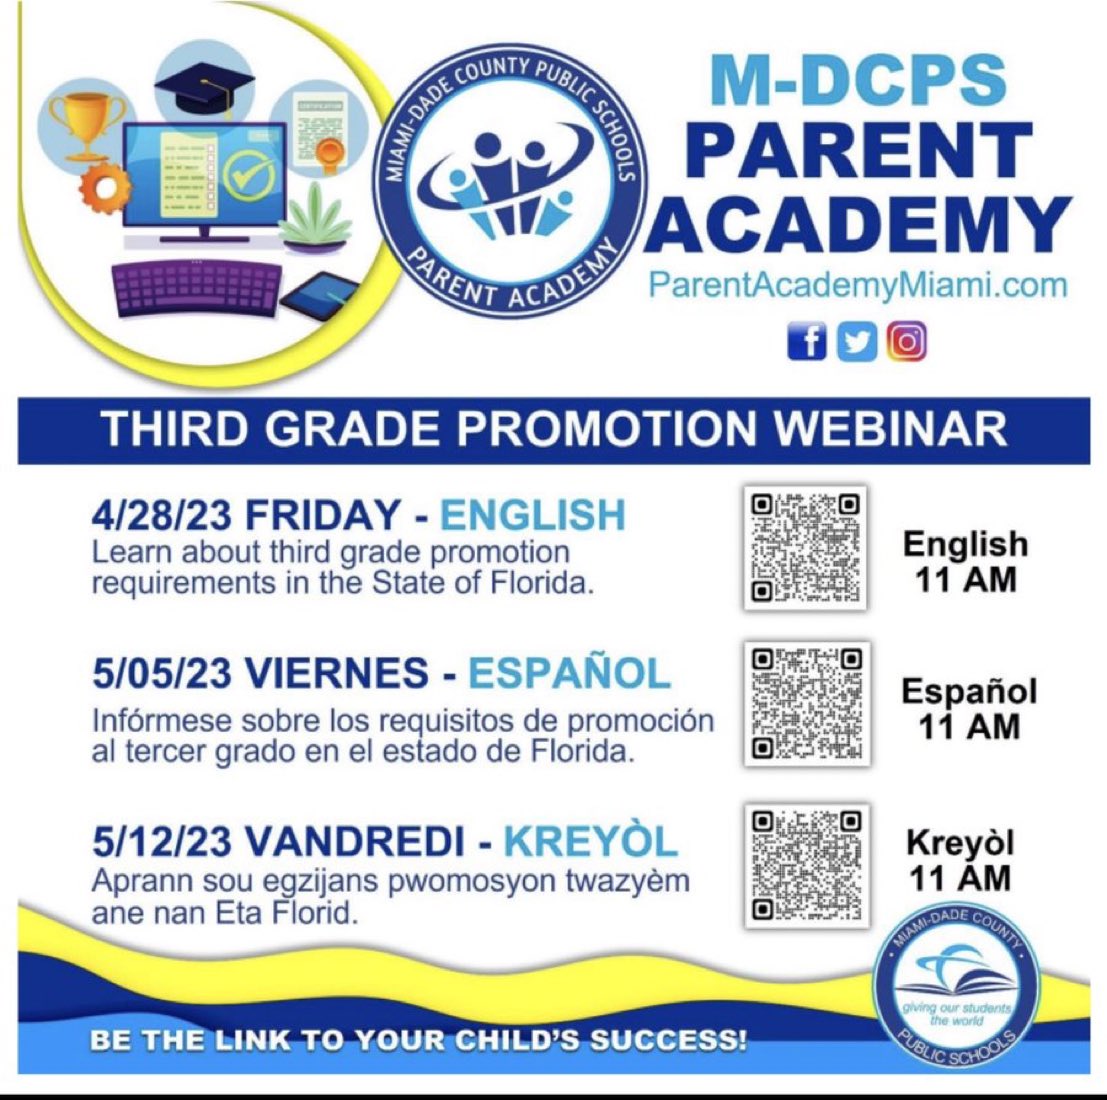 Please help me share with parents of third grade students! Sessions to help parents understand student promotion requirements for 3rd. Grade. @MDCPS @ParentAcadMiami